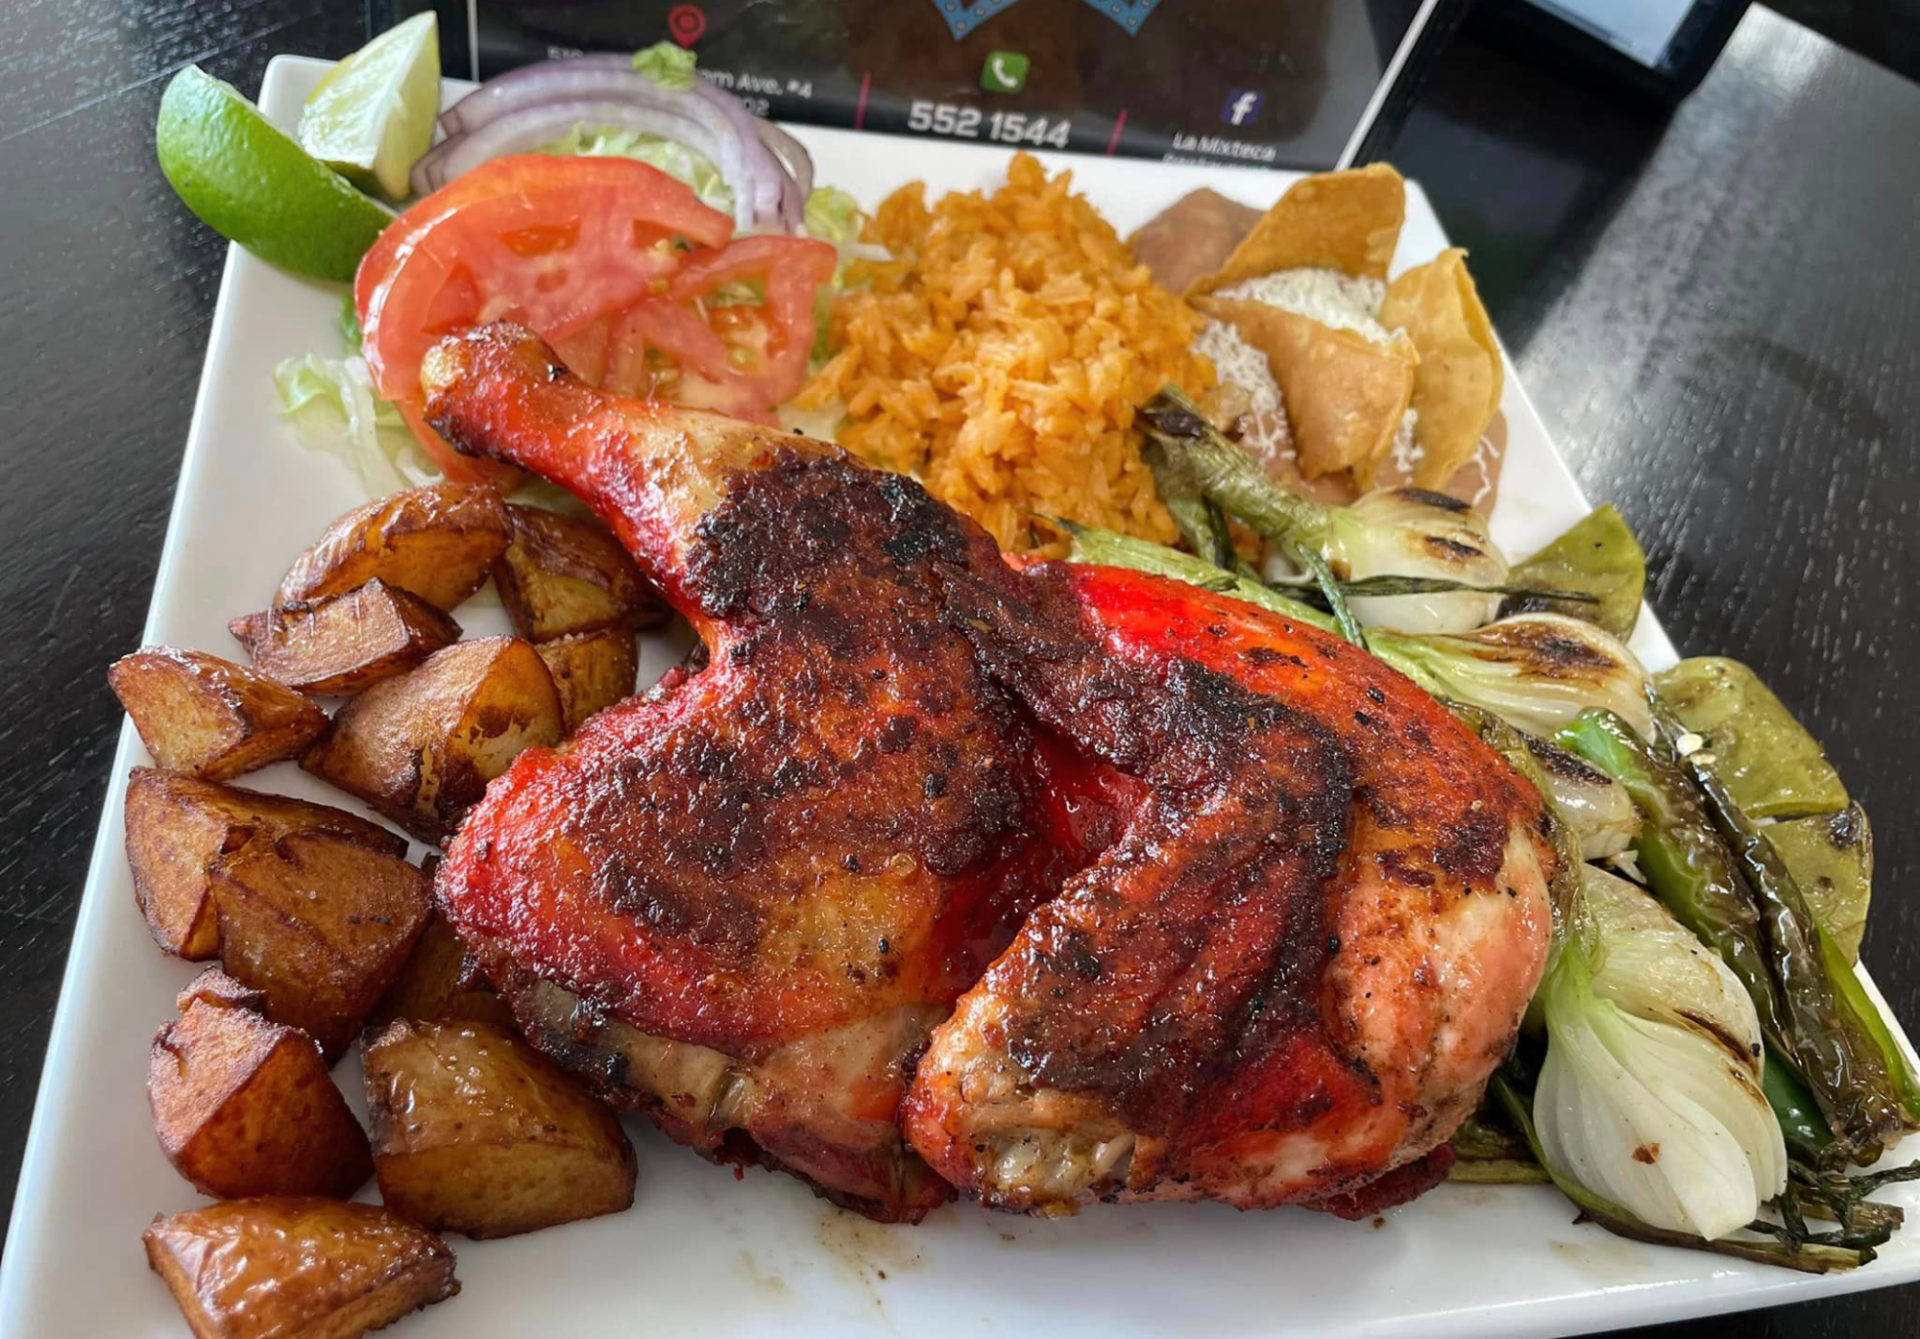 A dish of grilled chicken thighs with wings attached, roasted potatoes, grilled onions, rice, and beans served on a white plate at La Mixteca.